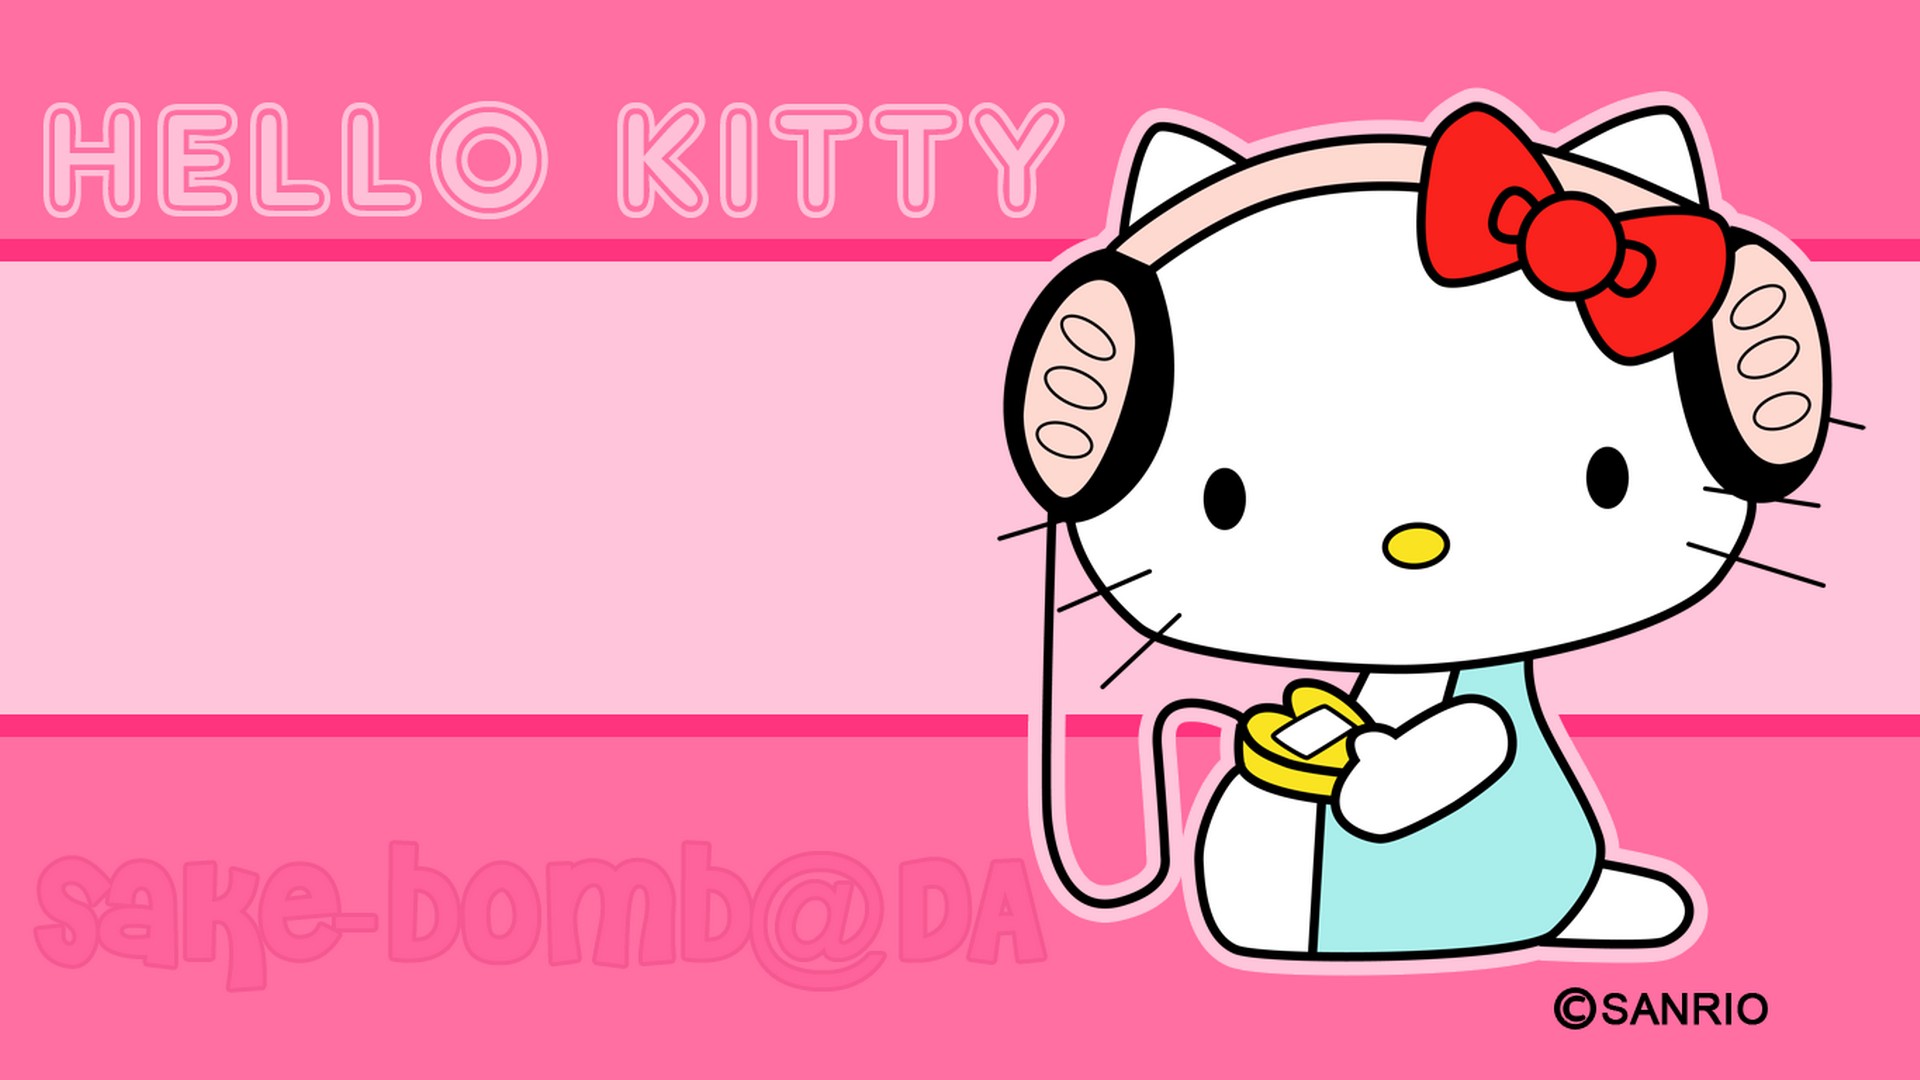 Hello Kitty Images Desktop Wallpaper with image resolution 1920x1080 pixel. You can use this wallpaper as background for your desktop Computer Screensavers, Android or iPhone smartphones